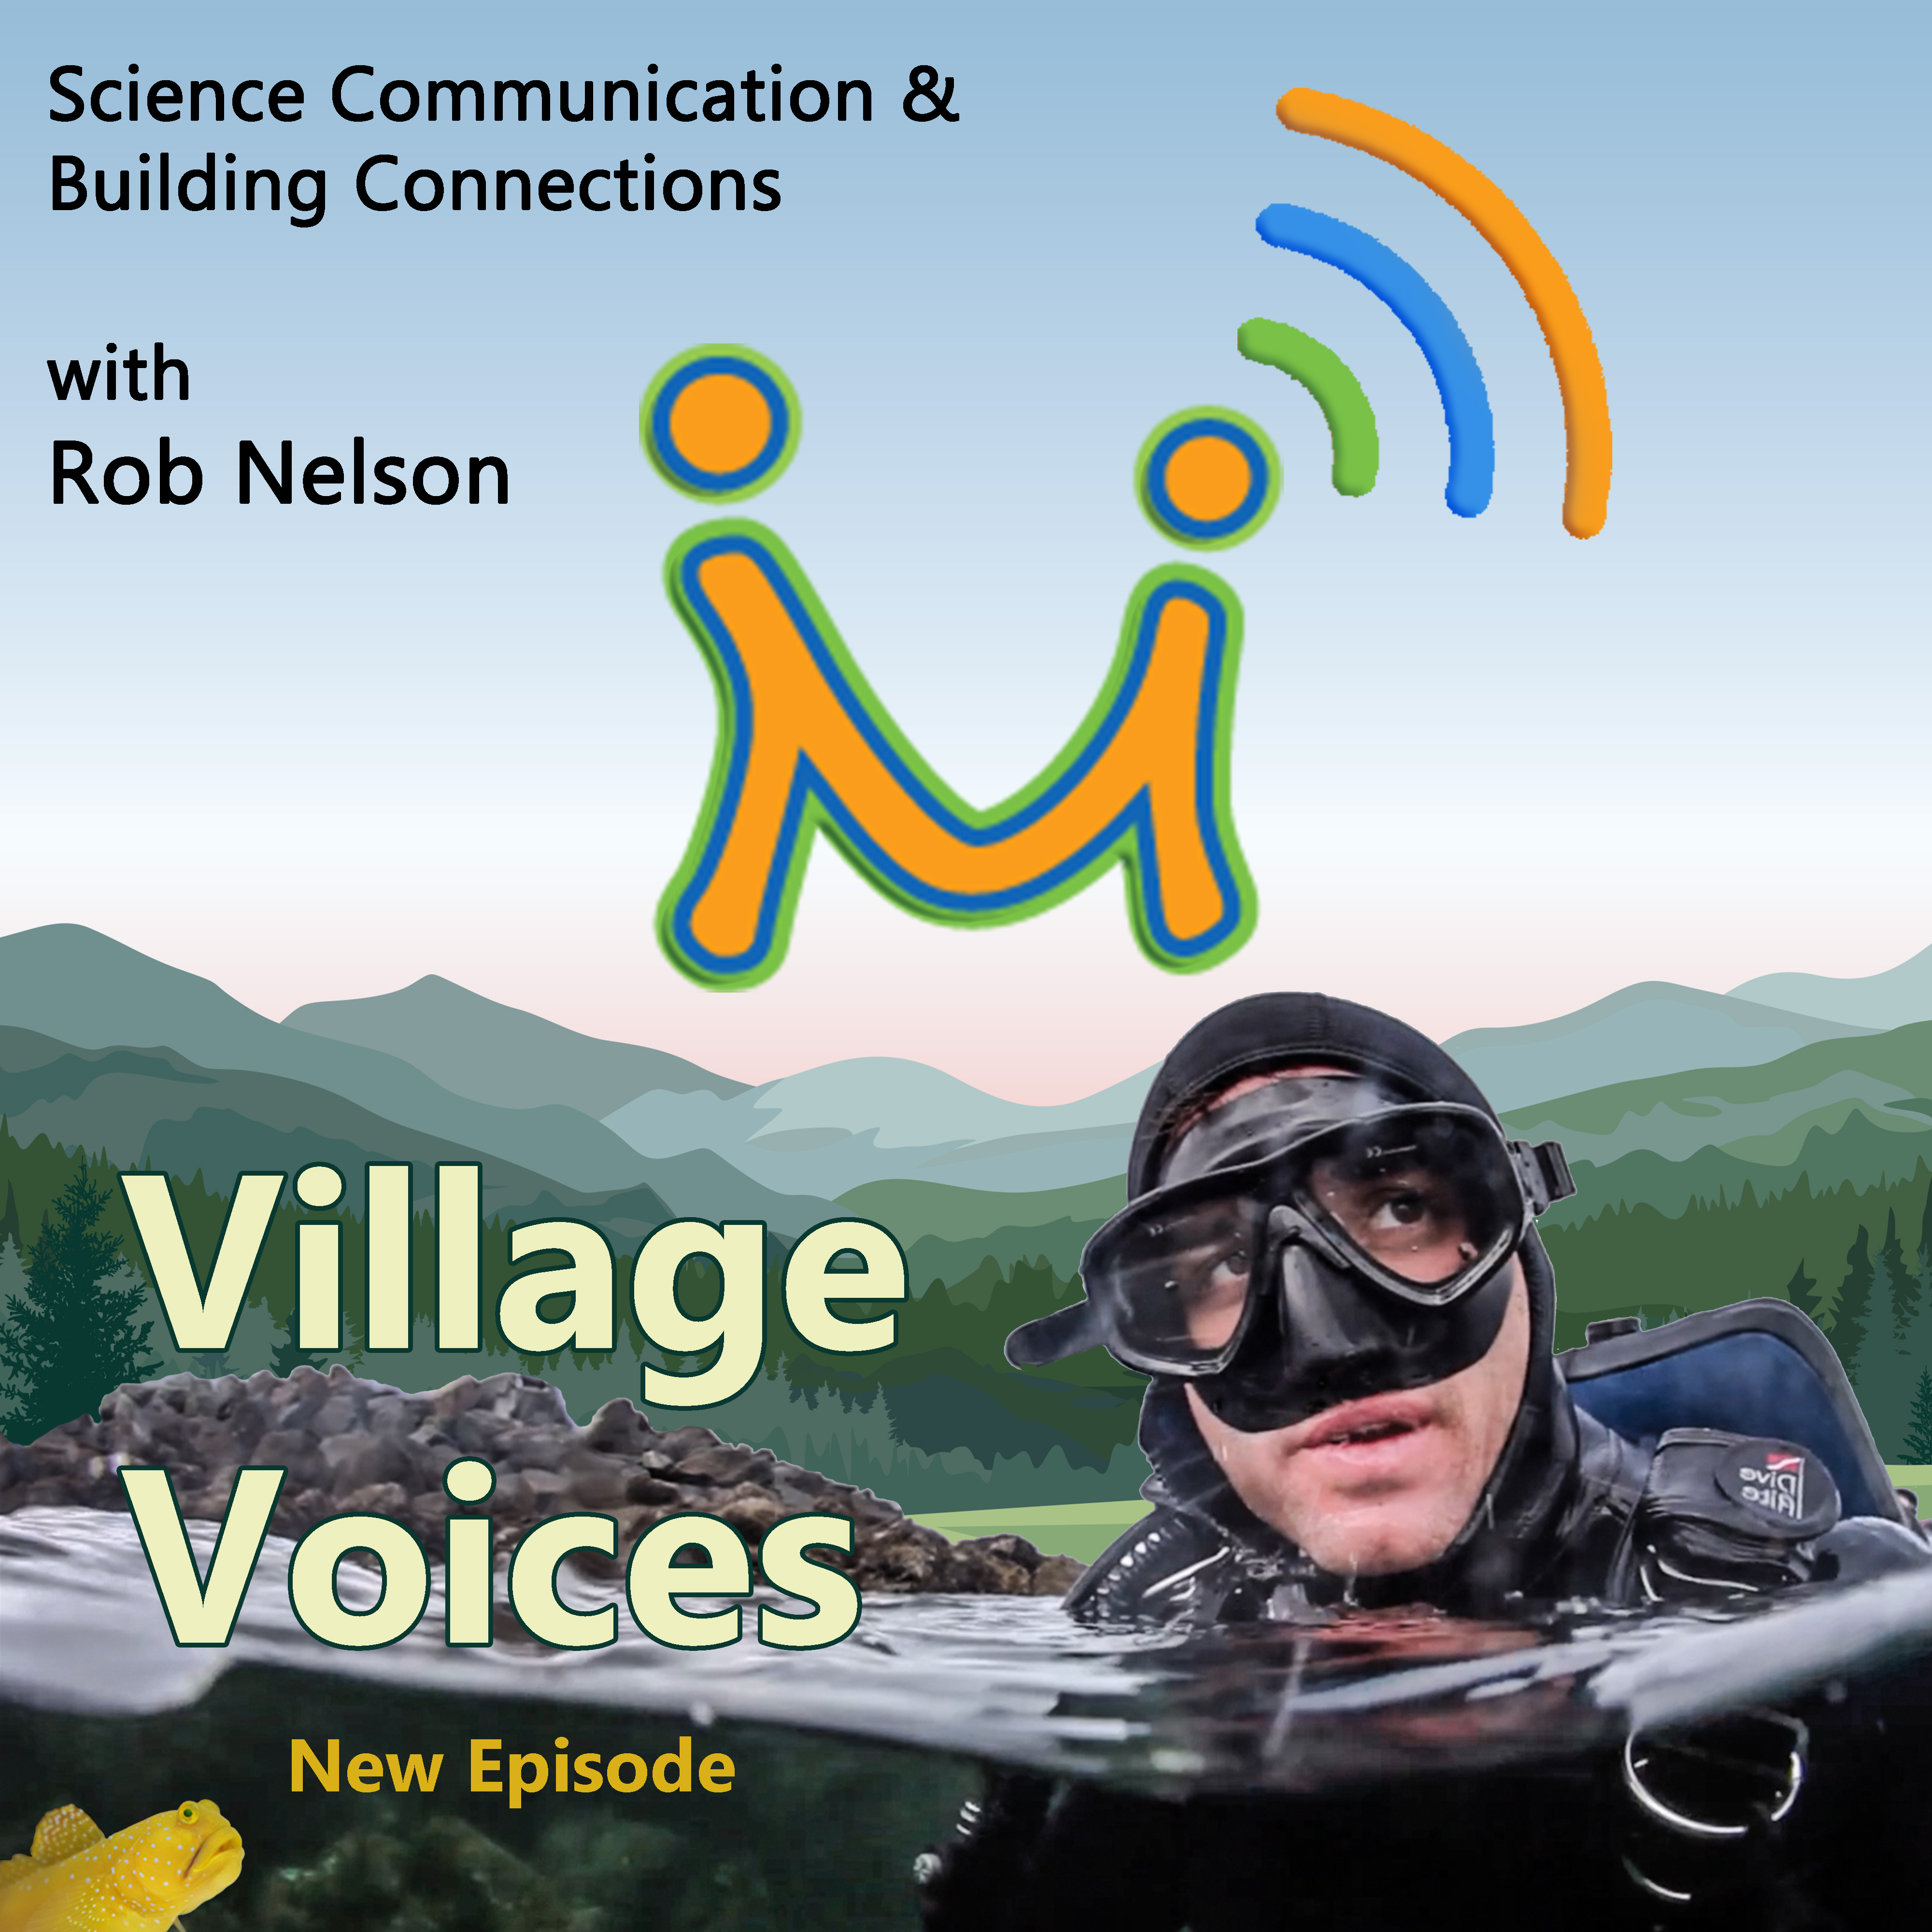 Communicating Science & Building Connections- SciComm & Nature with Emmy Winning Filmmaker Rob Nelson